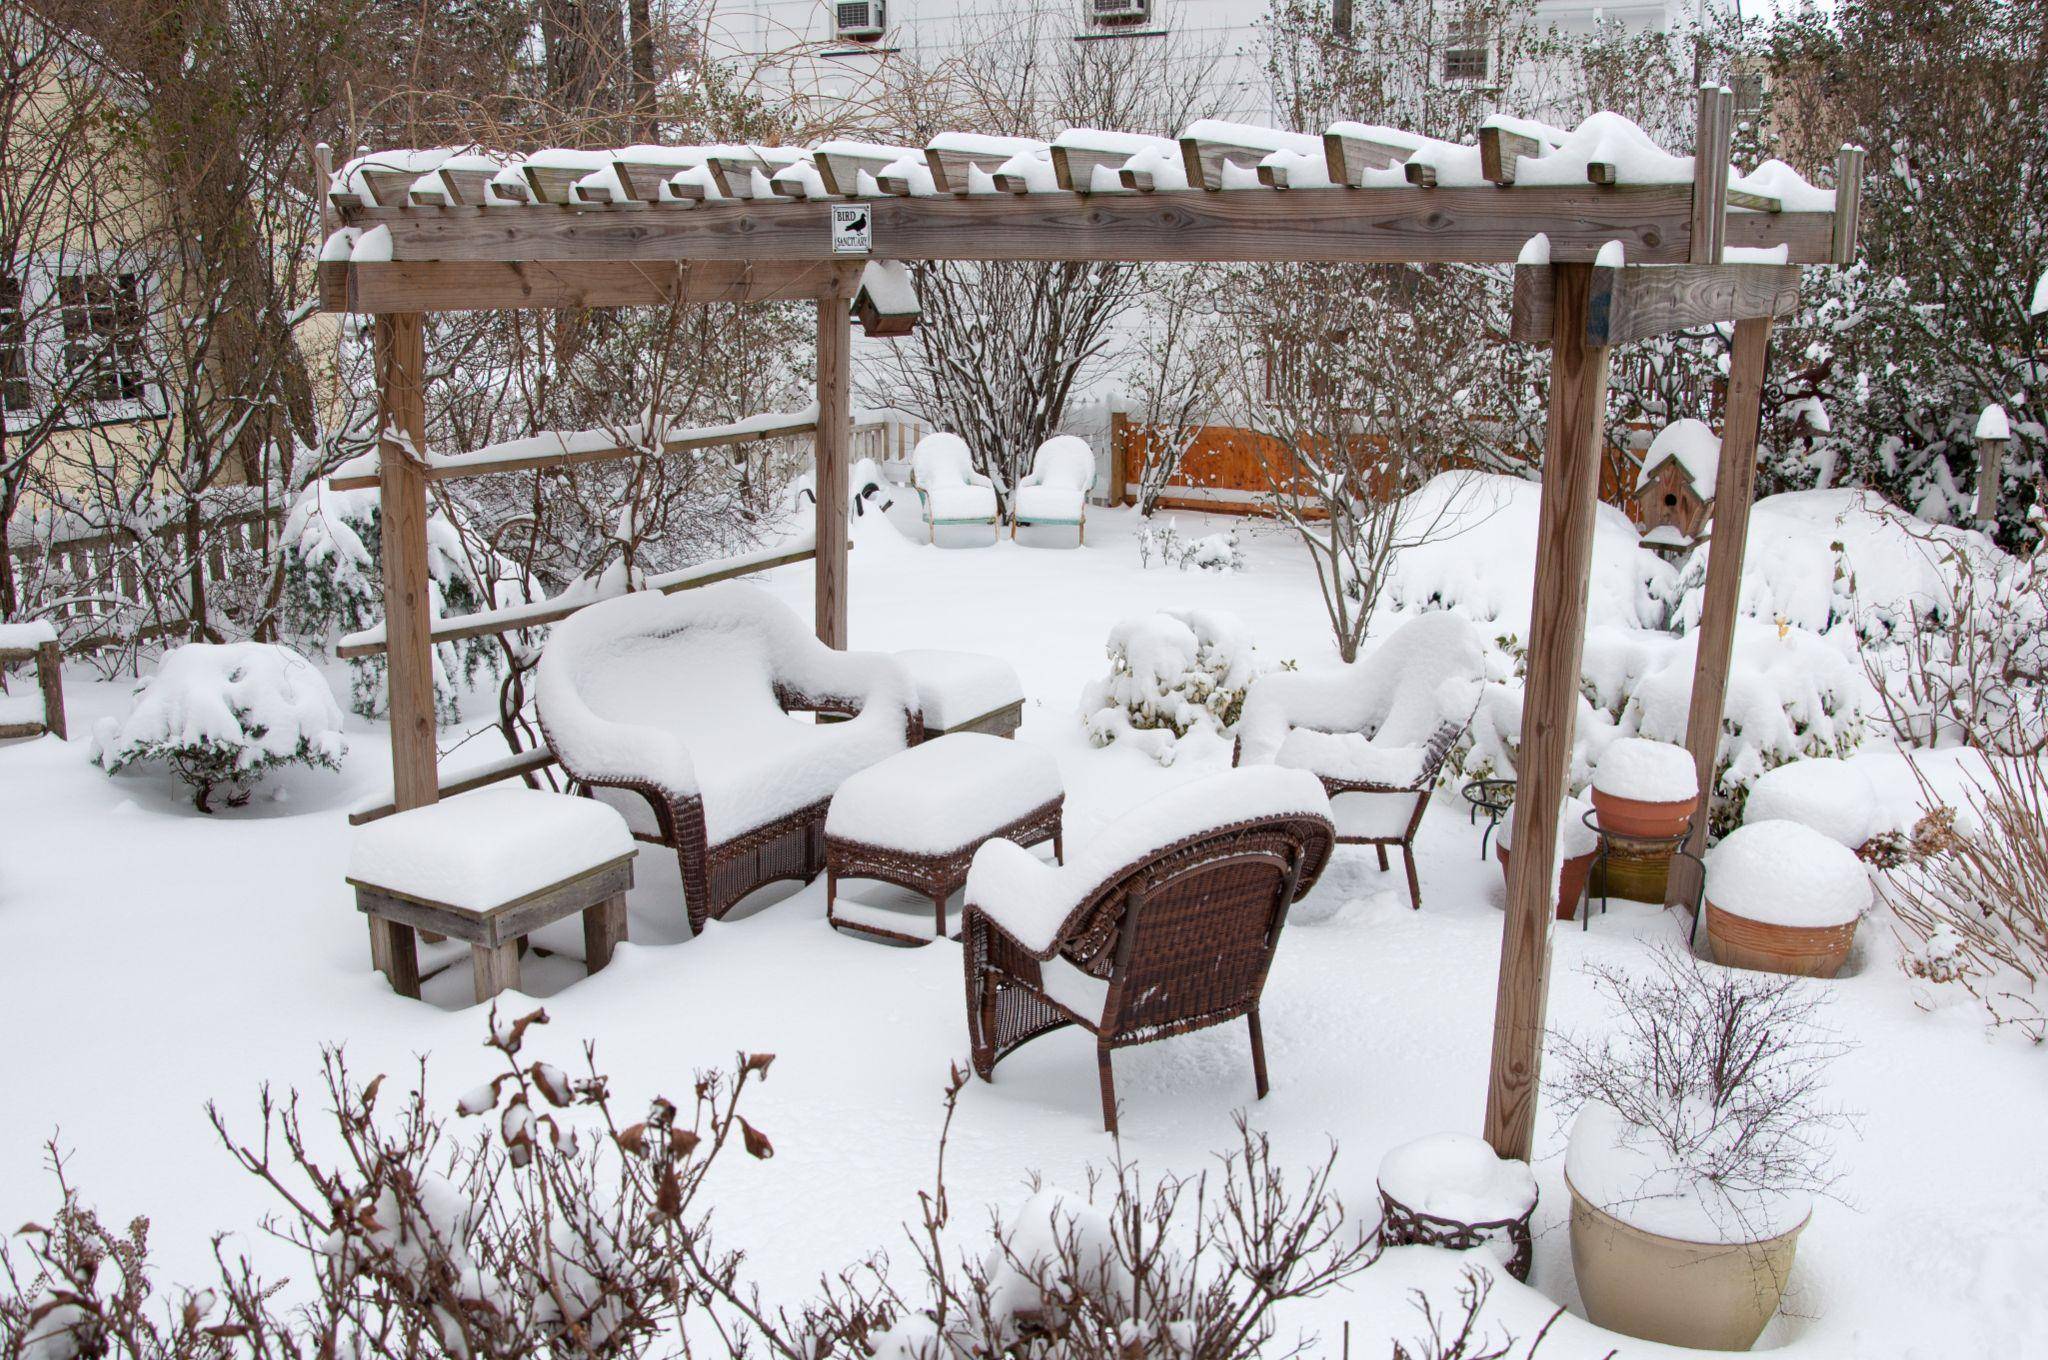 5 Ways to Update Your Backyard or Patio for Winter